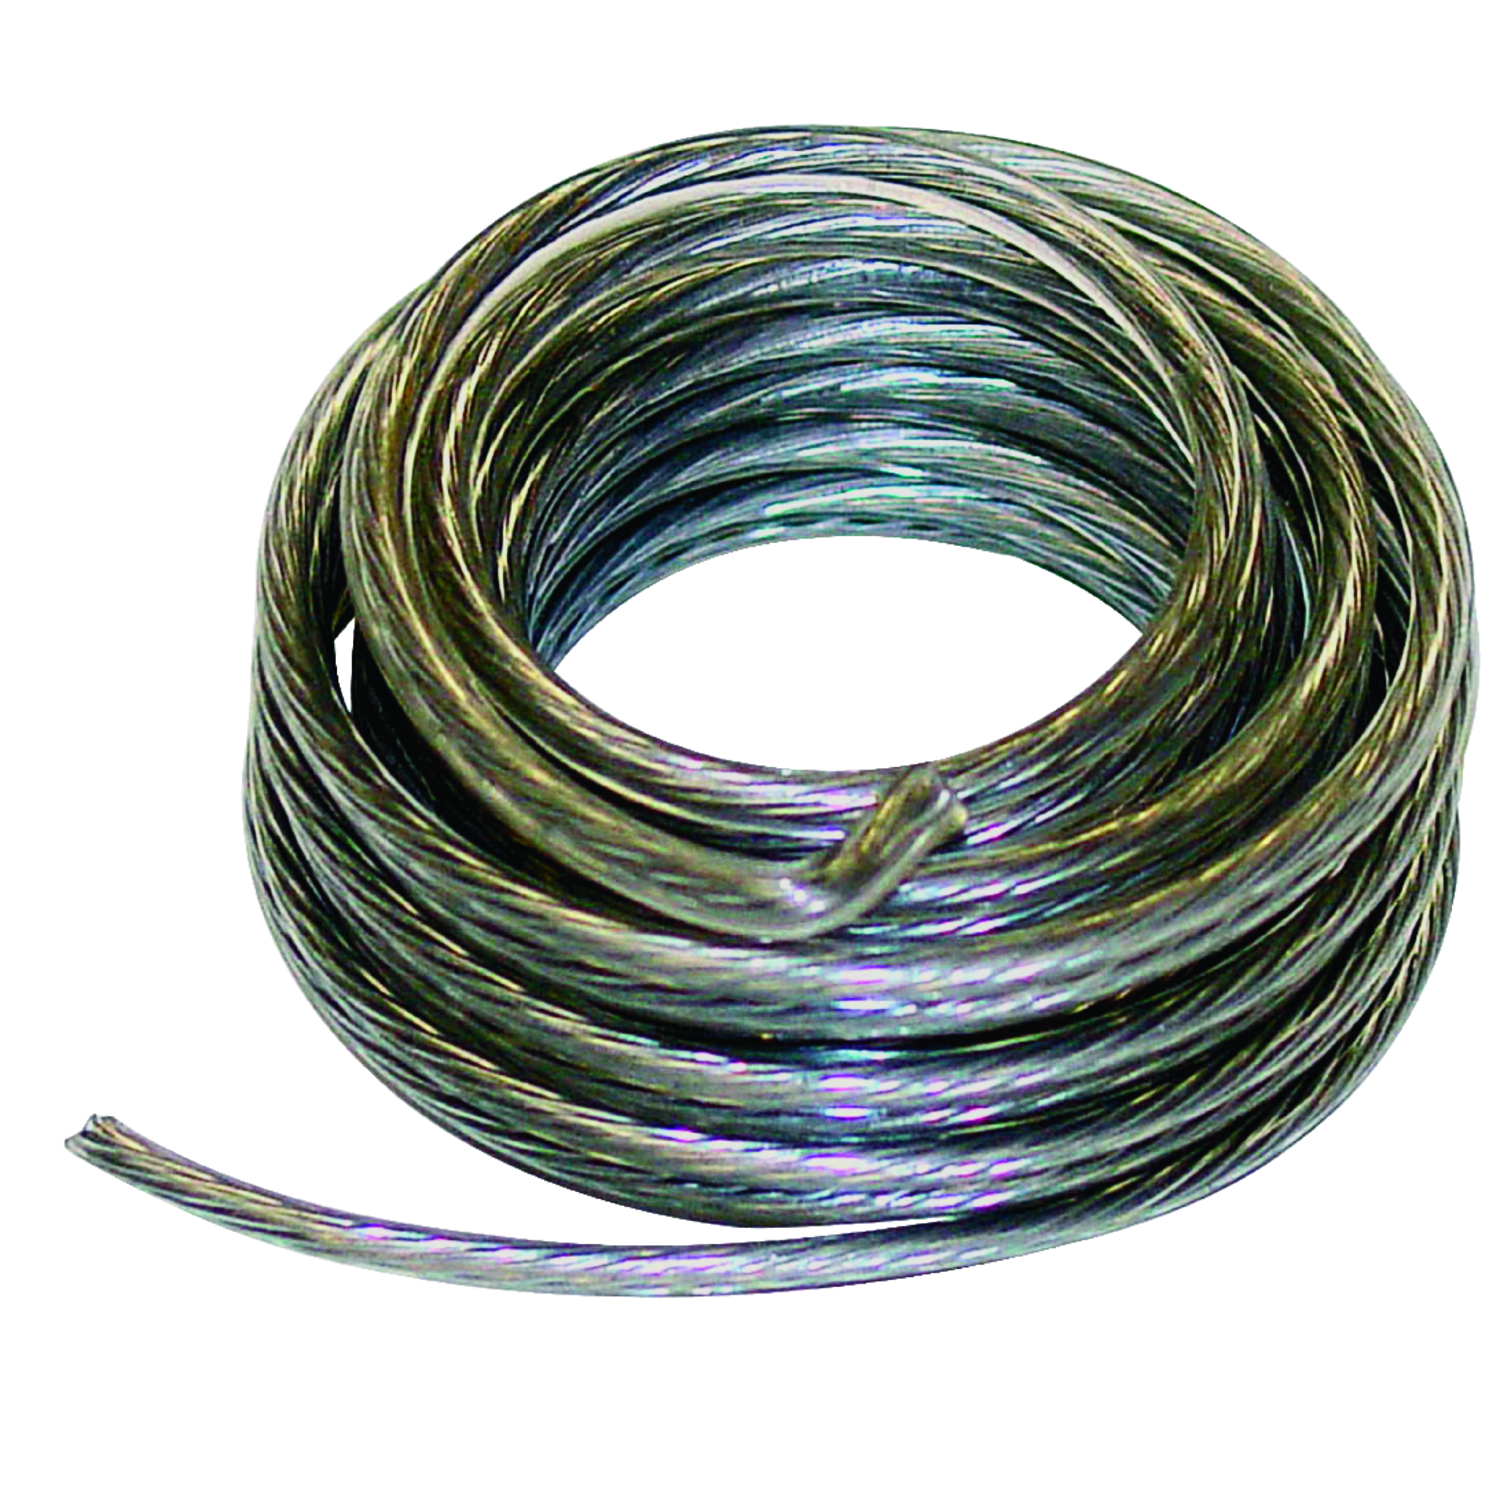 OOK 50lbs Framers Wire